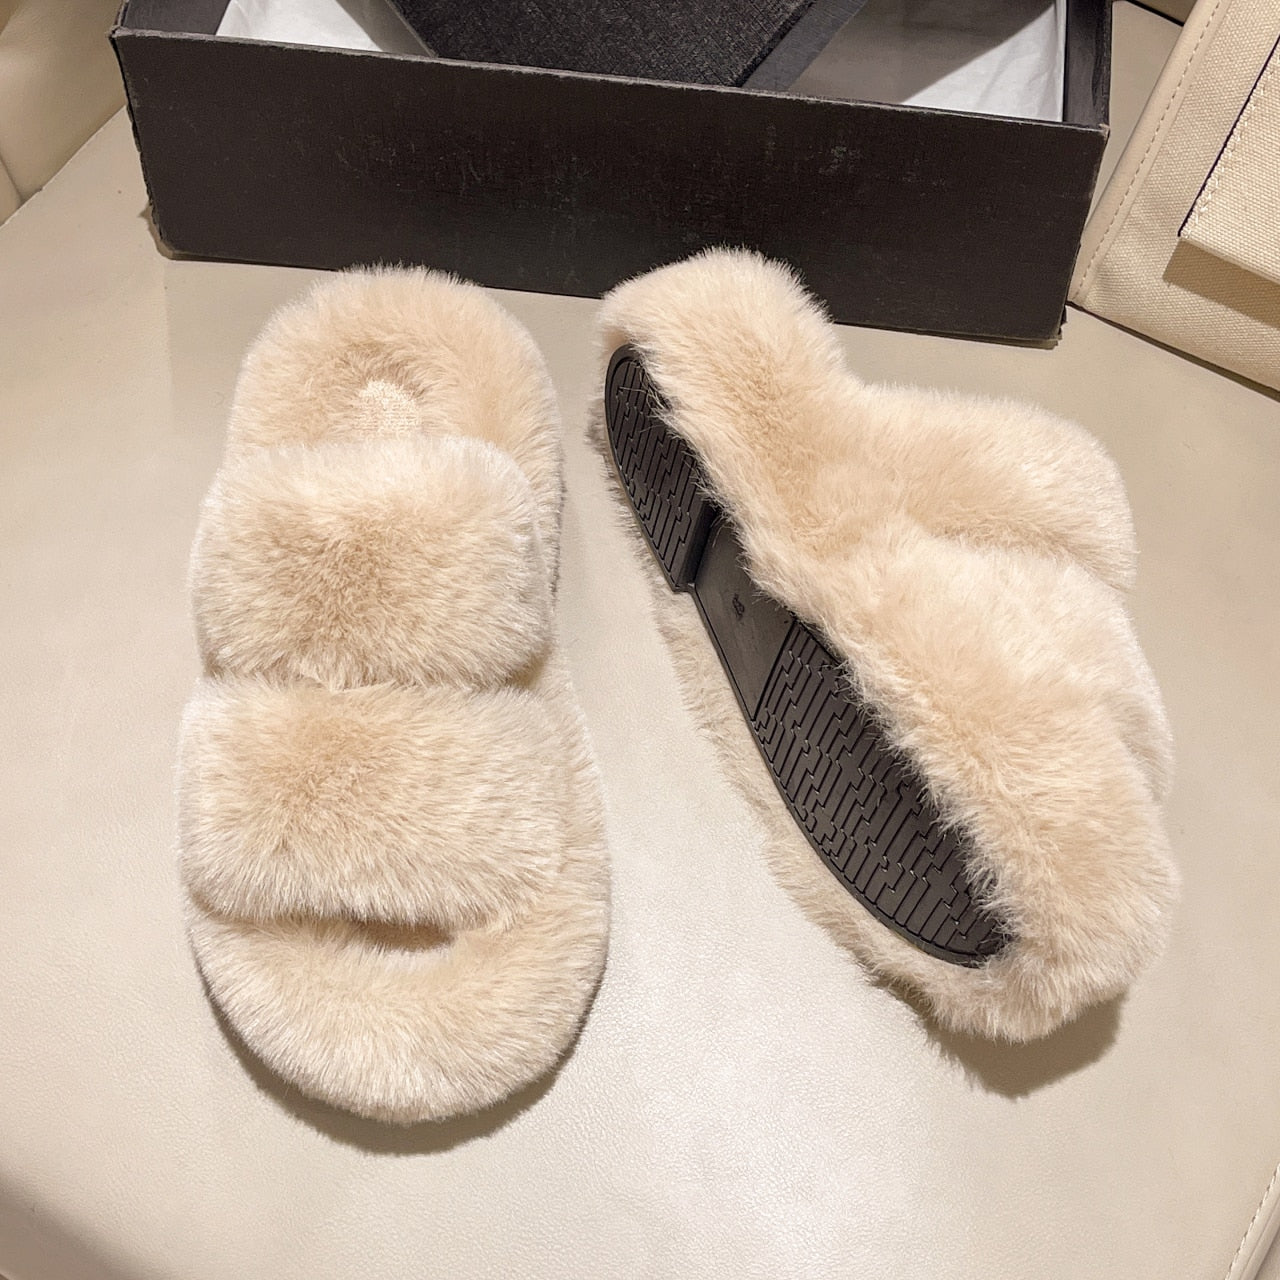 Slippers Home Rest